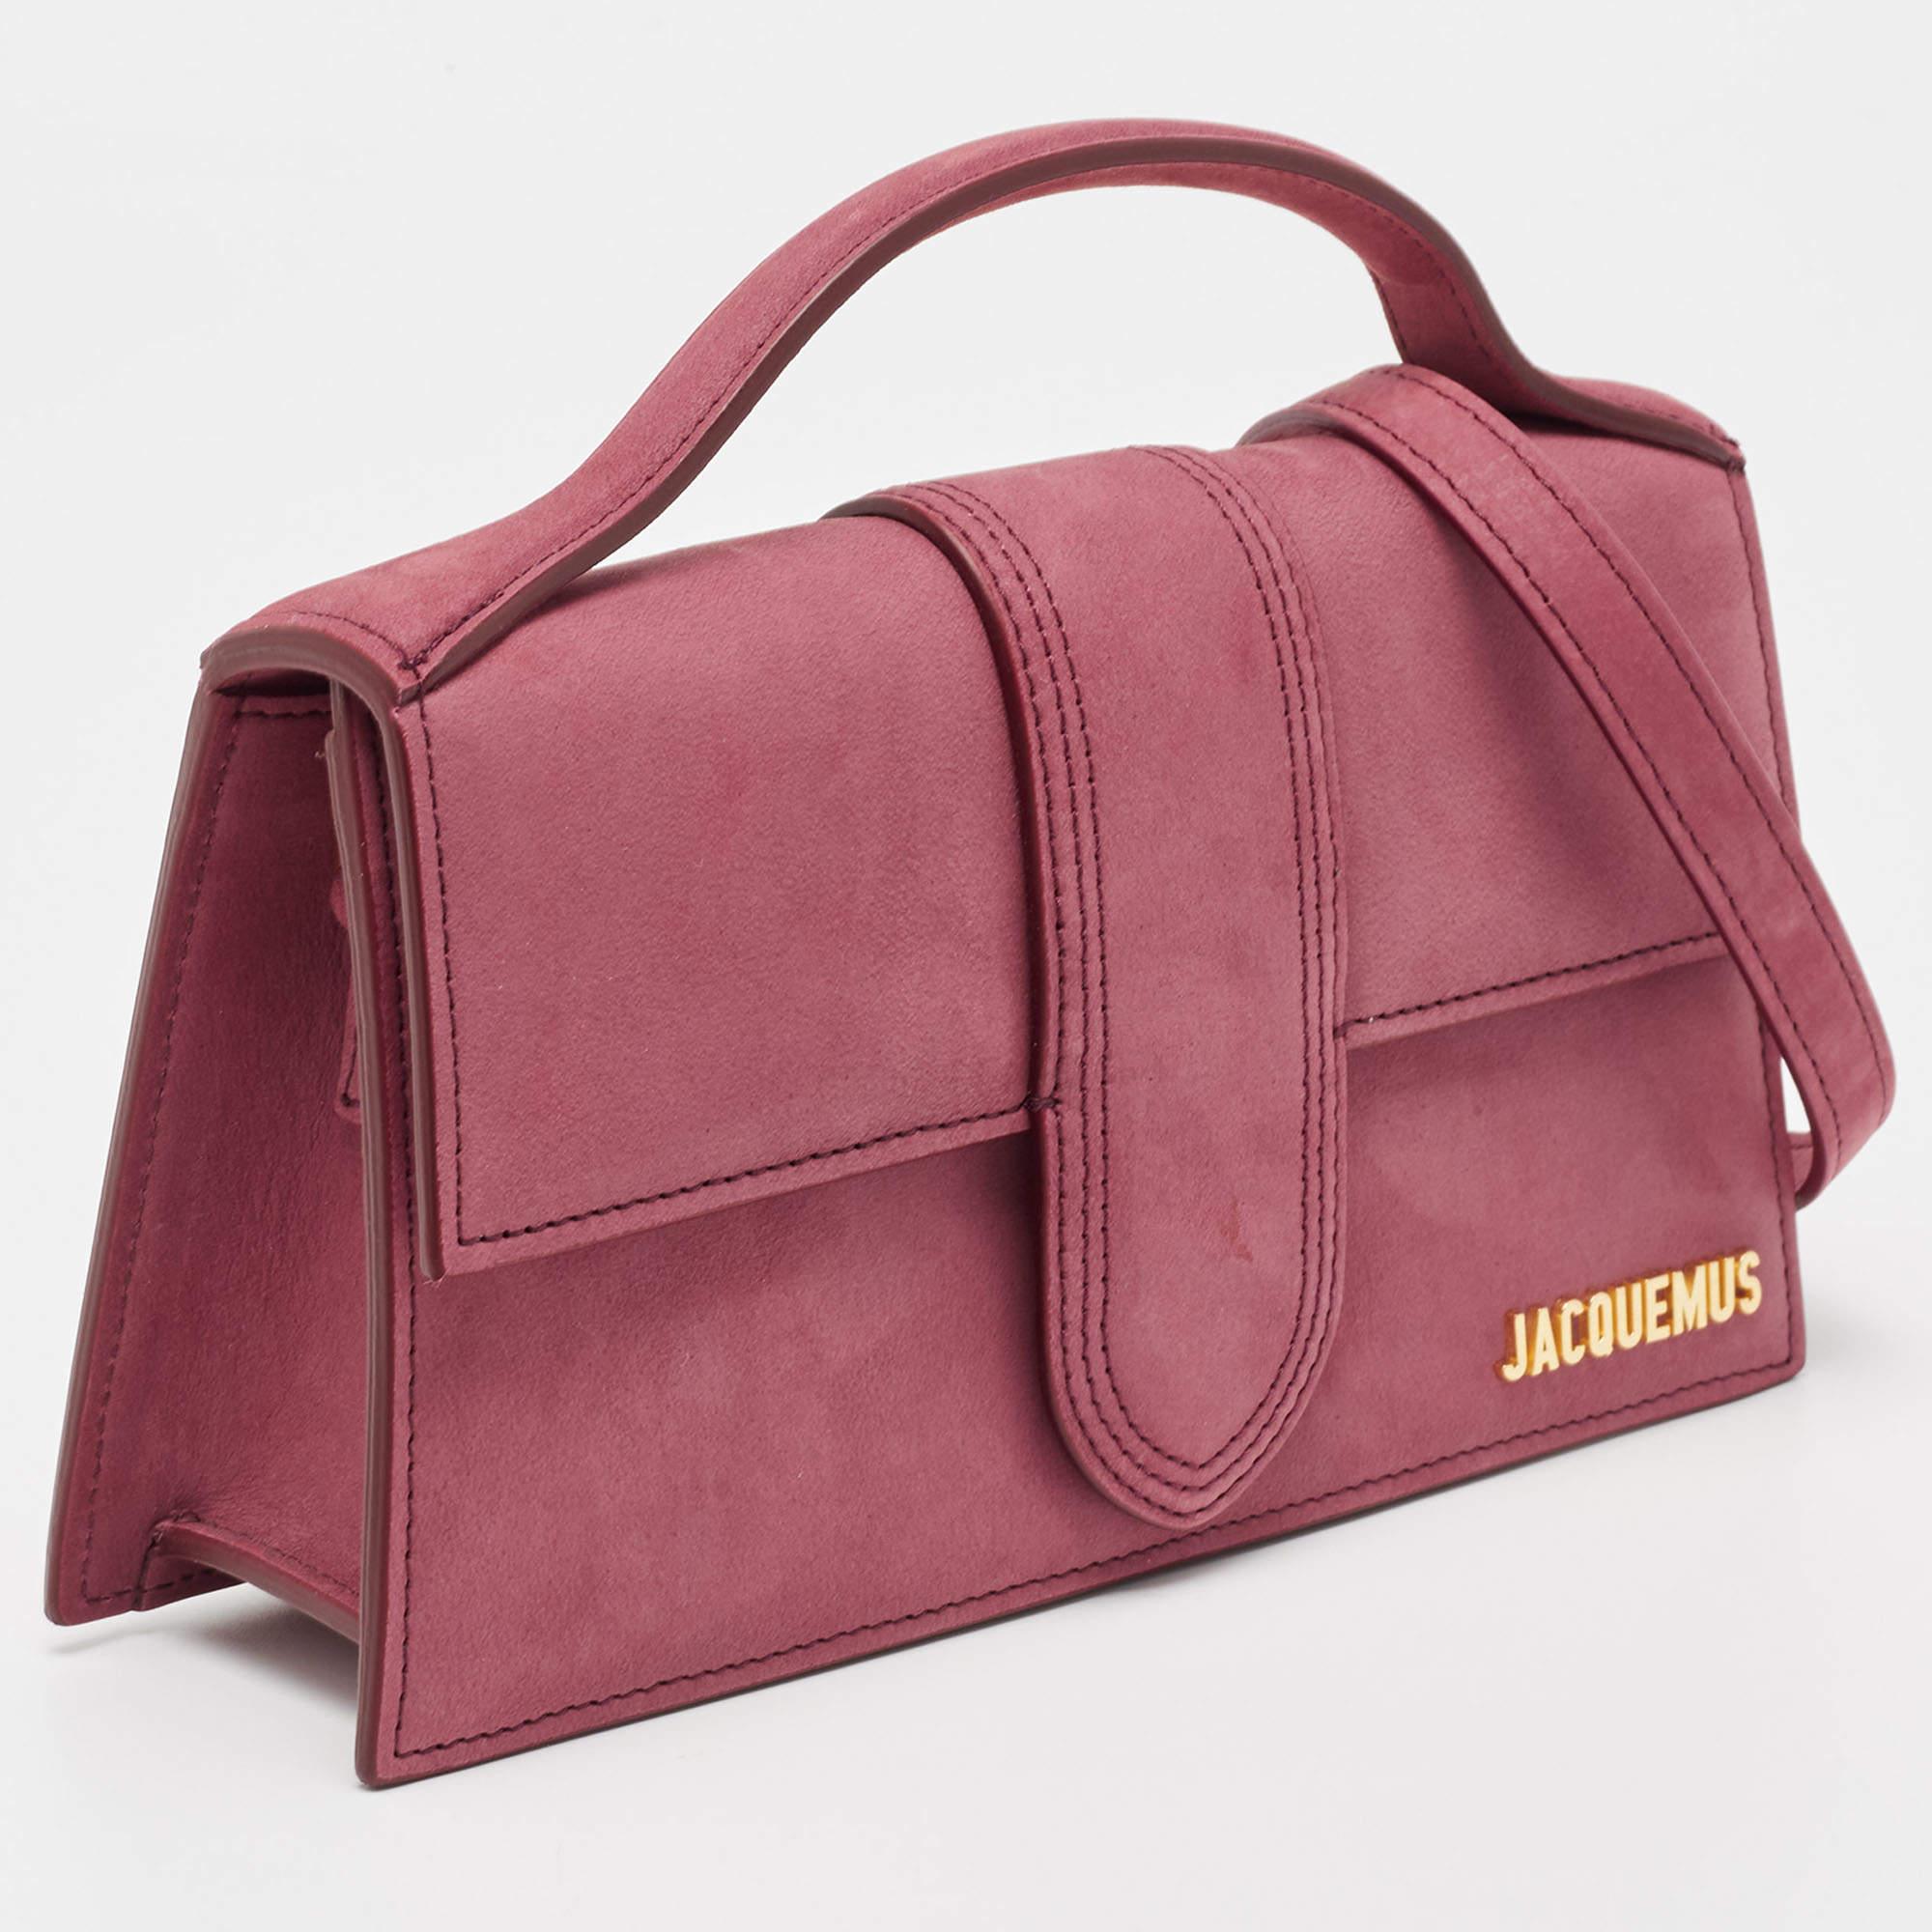 Experience the trendy fashion offered by Jacquemus when you choose this bag. Designed in green, this Le Bambino bag has a structured look and minimal details. Made using high-quality leather, this bag is equipped with a top handle, a shoulder strap,